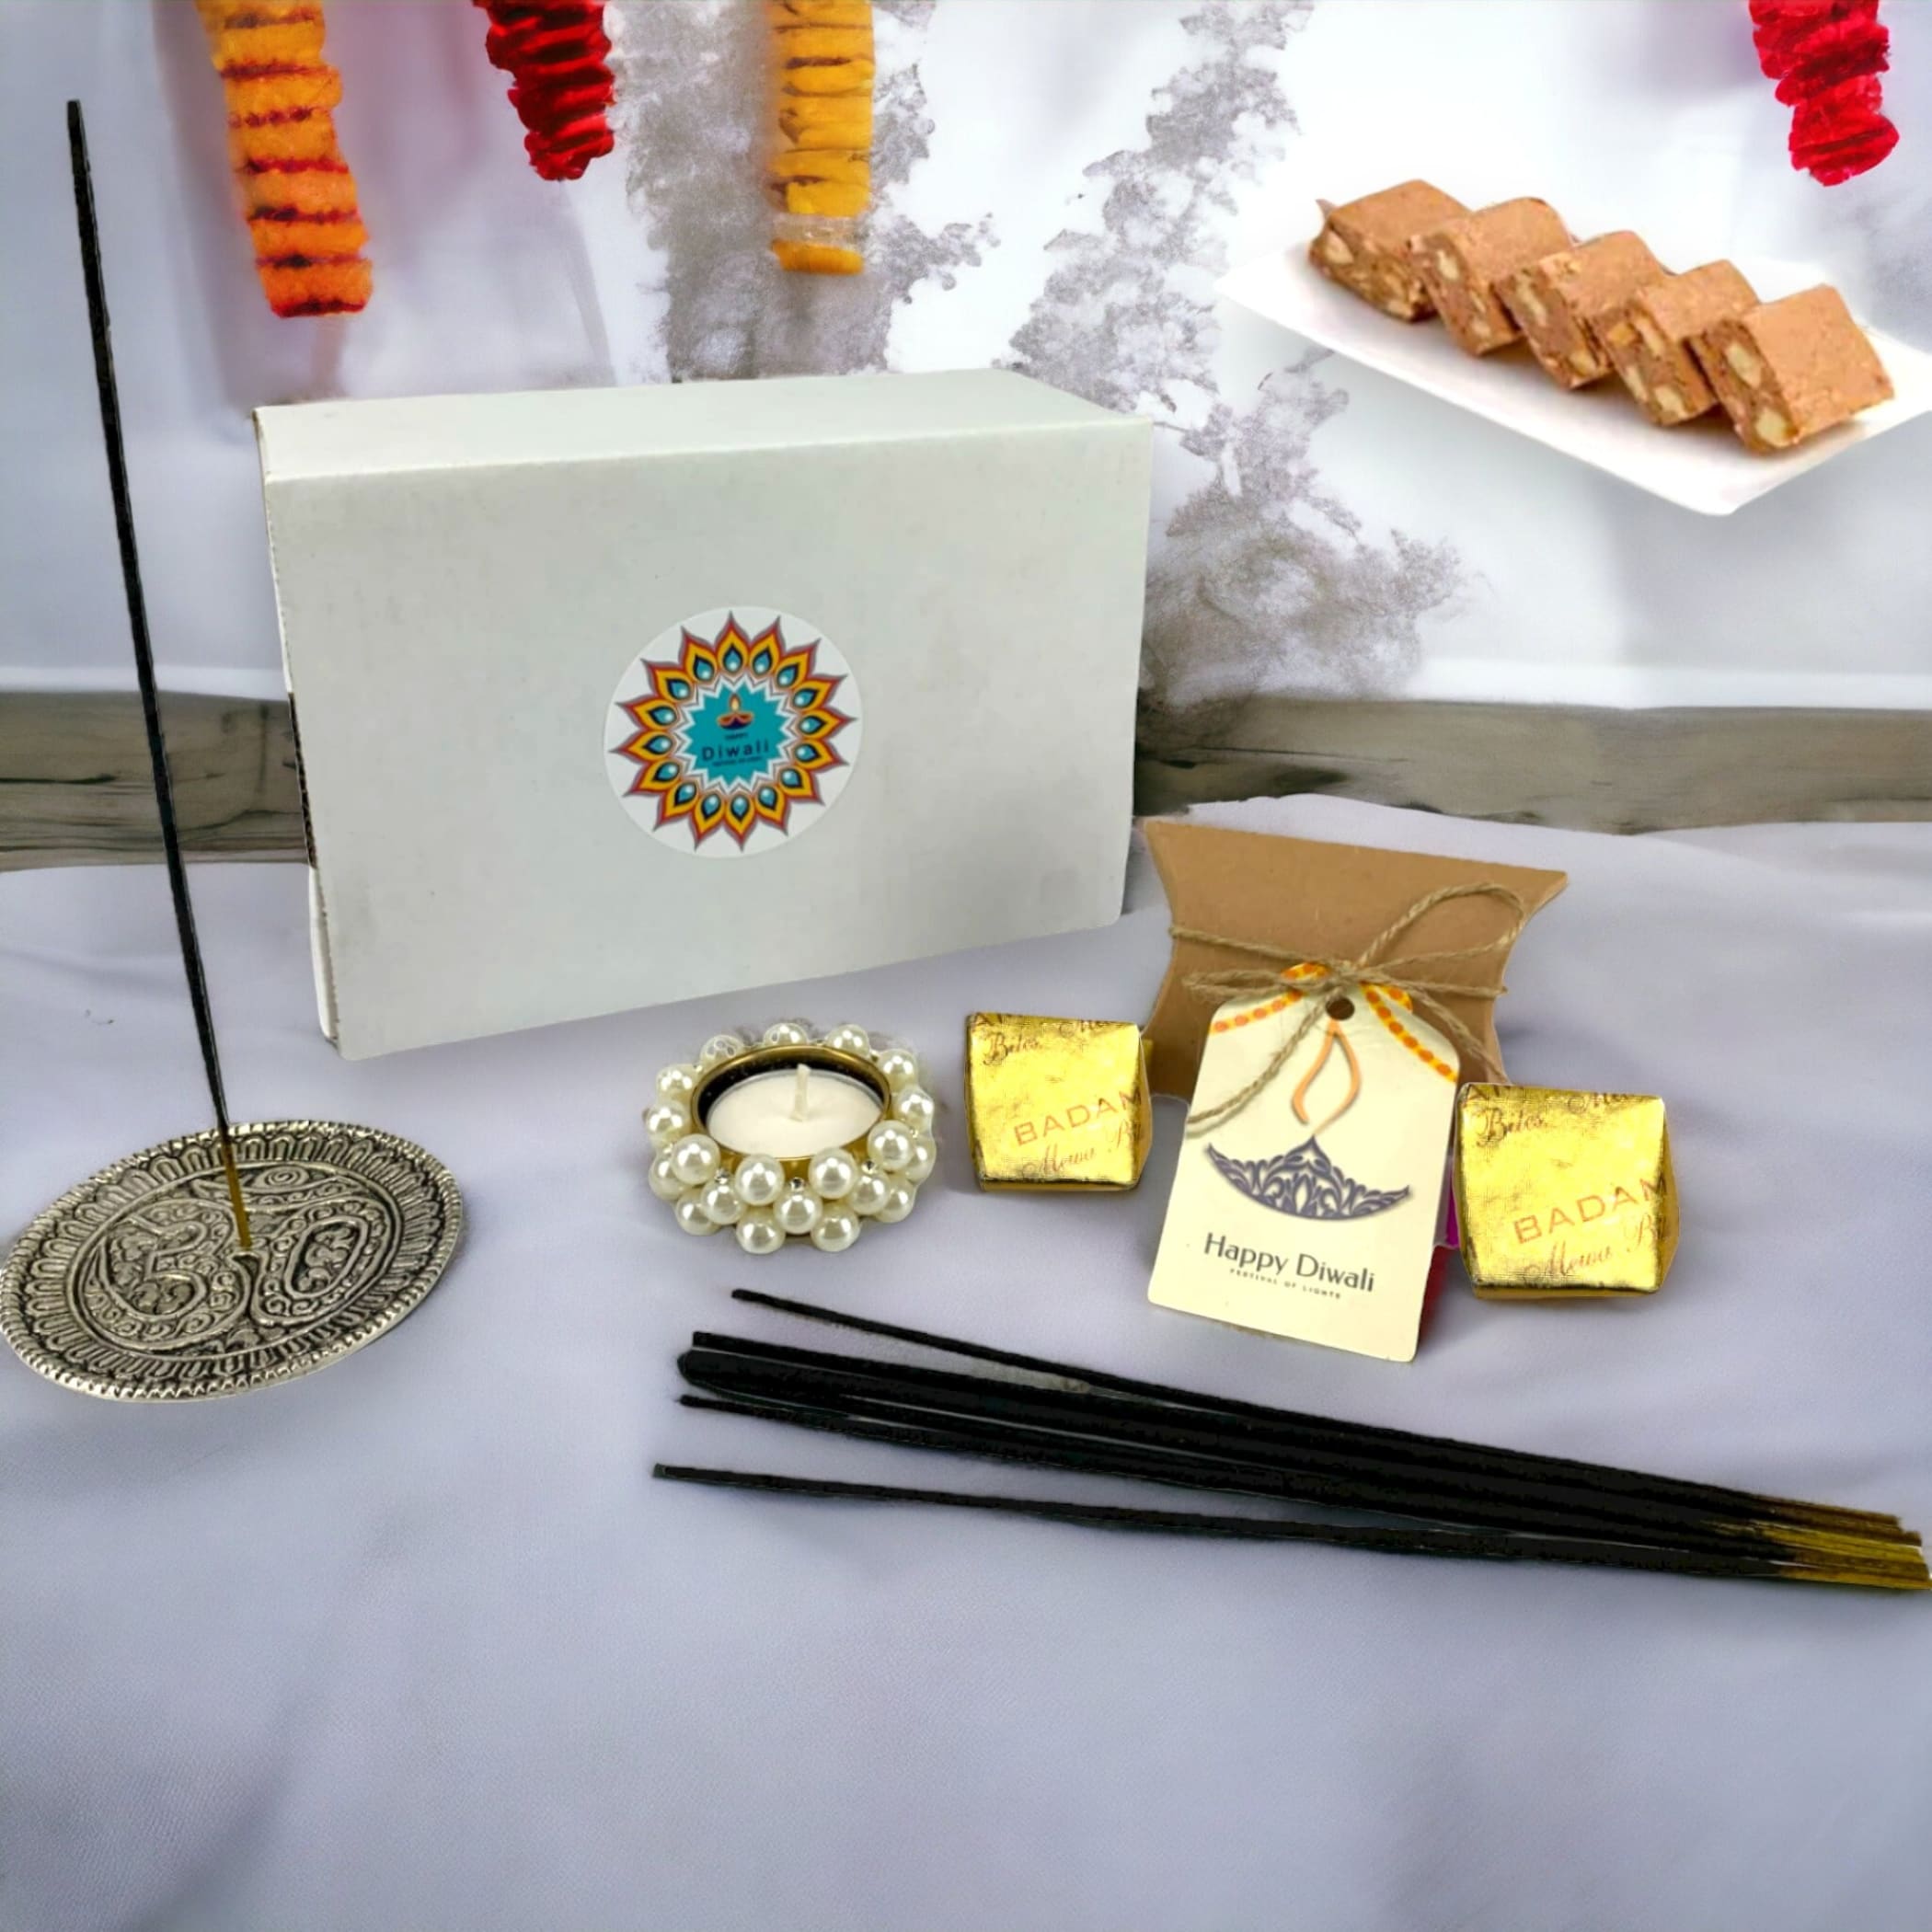 Personalized diwali gifts hamper indian gift boxes navratri